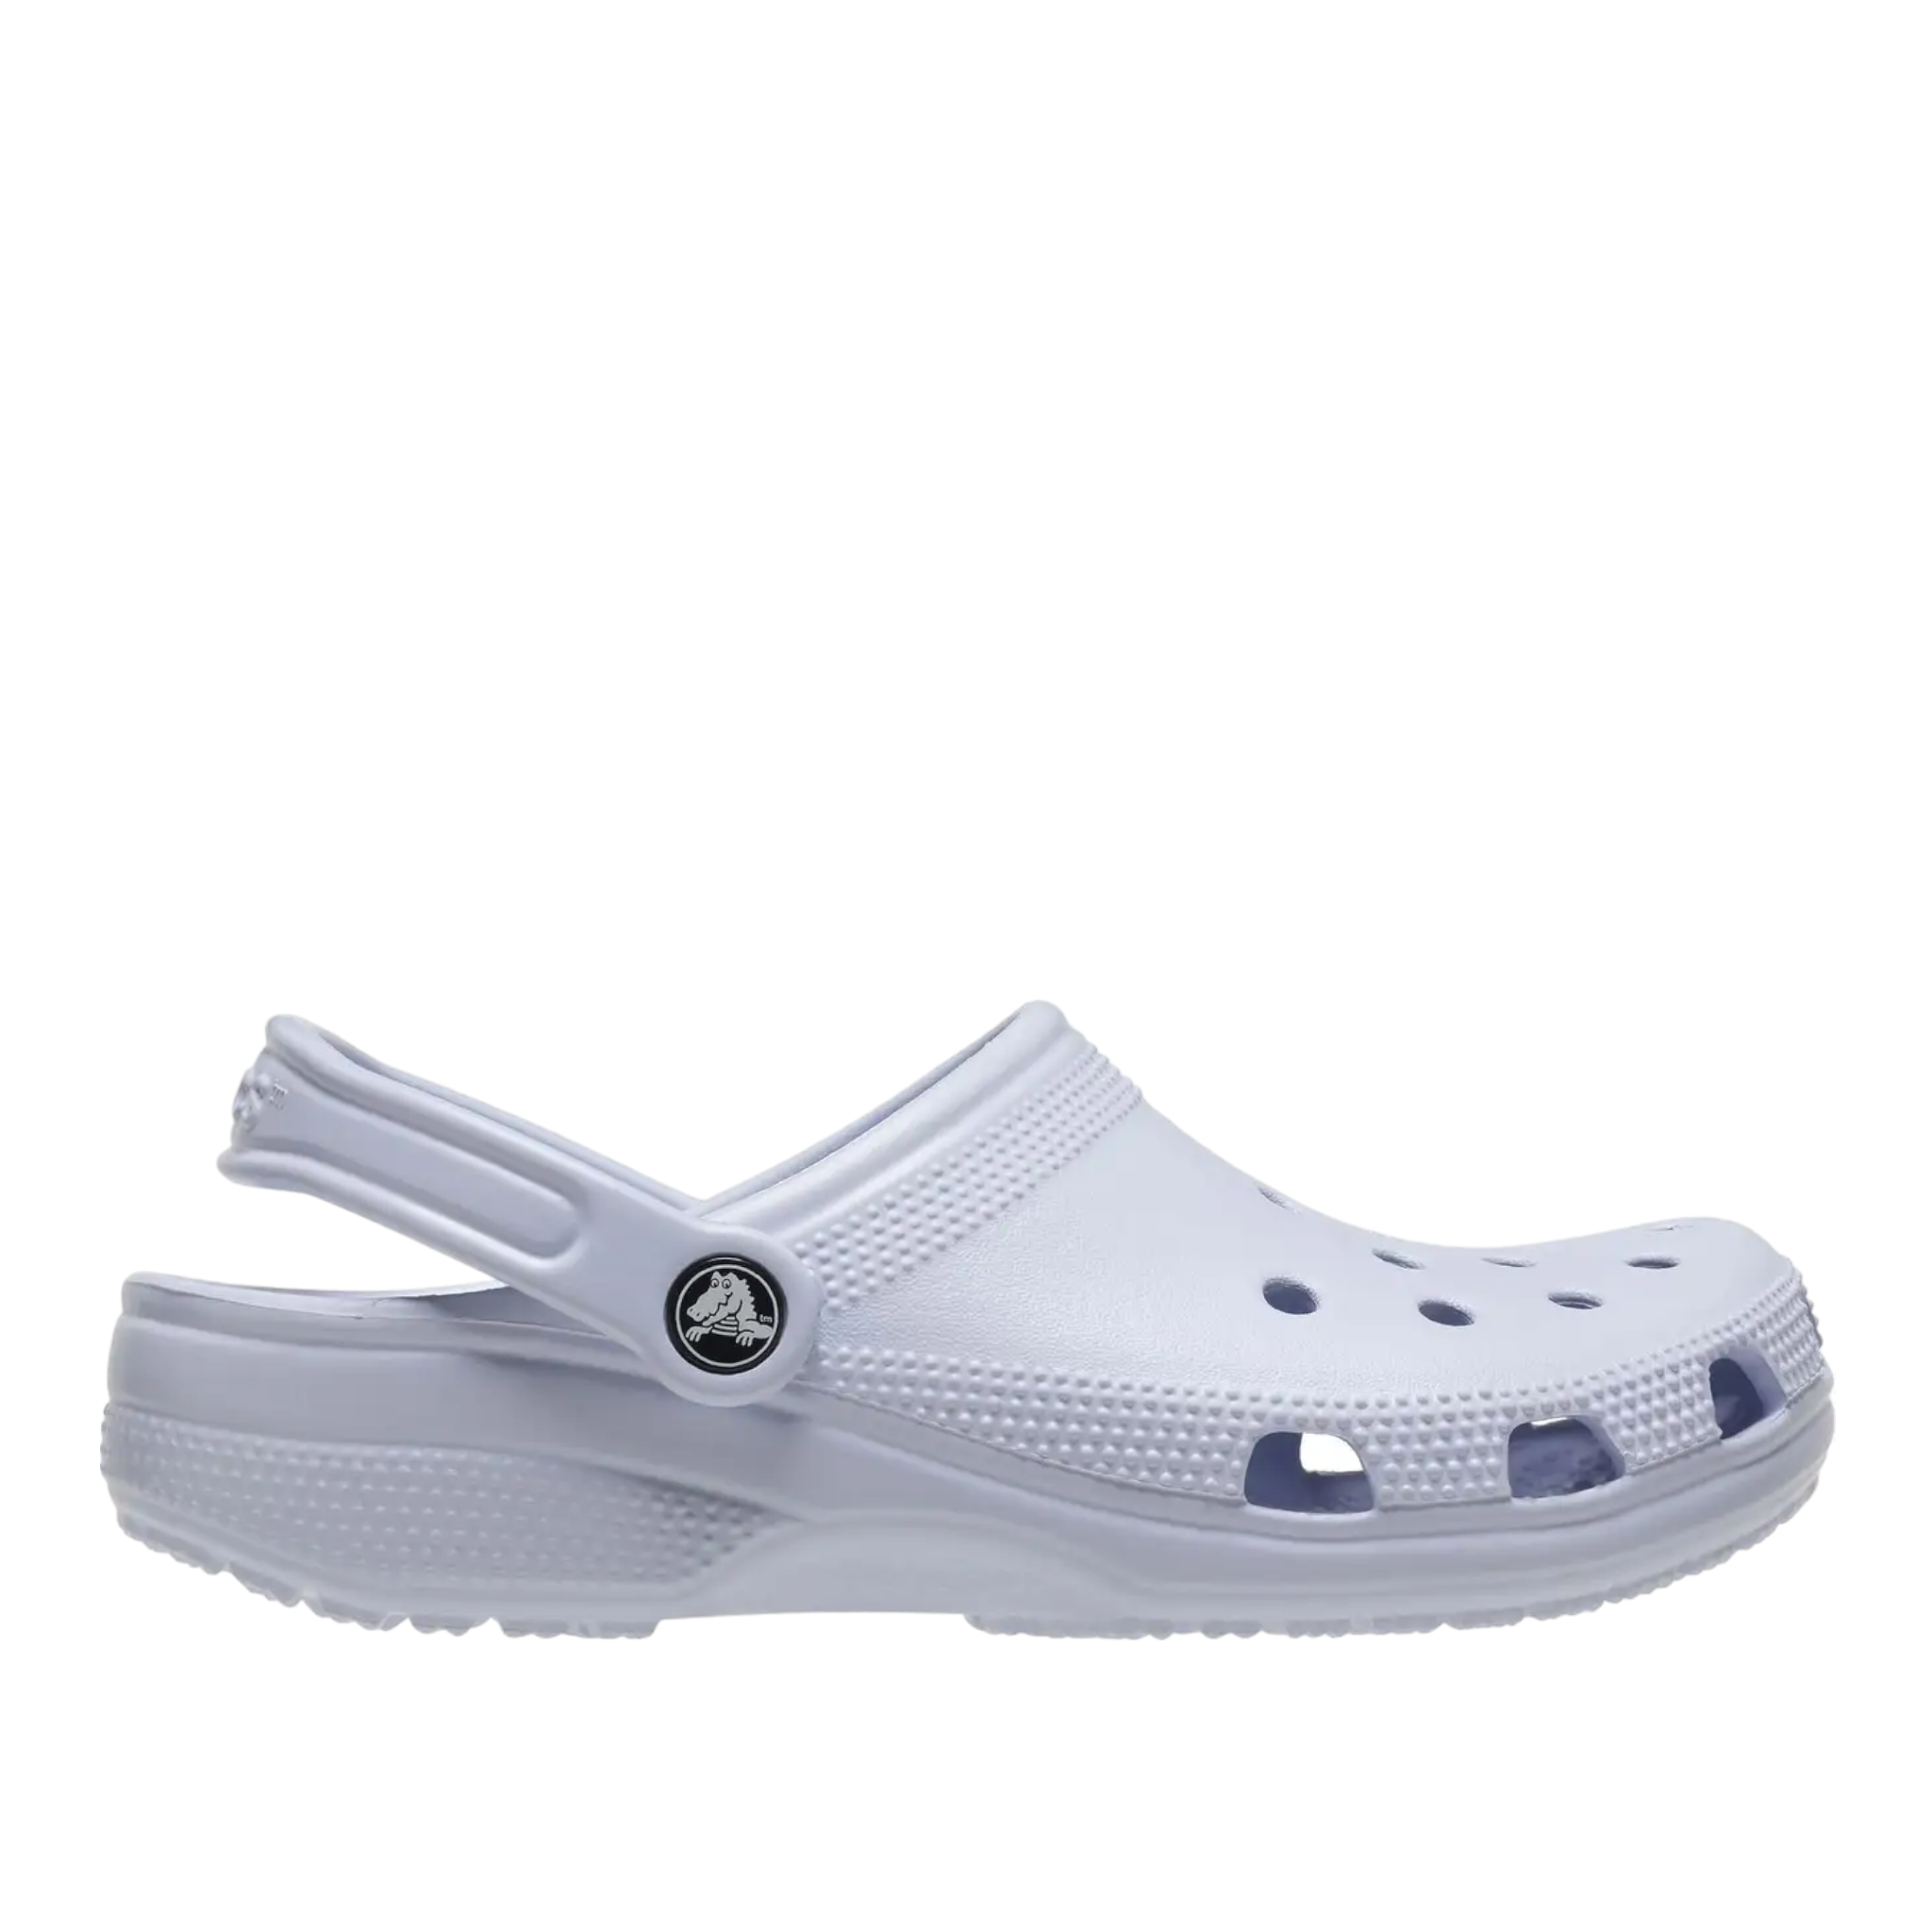 Shop Classic Clog Crocs - with shoe&amp;me - from Crocs - Clogs - Clog, Mens, Summer, Winter, Womens - [collection]